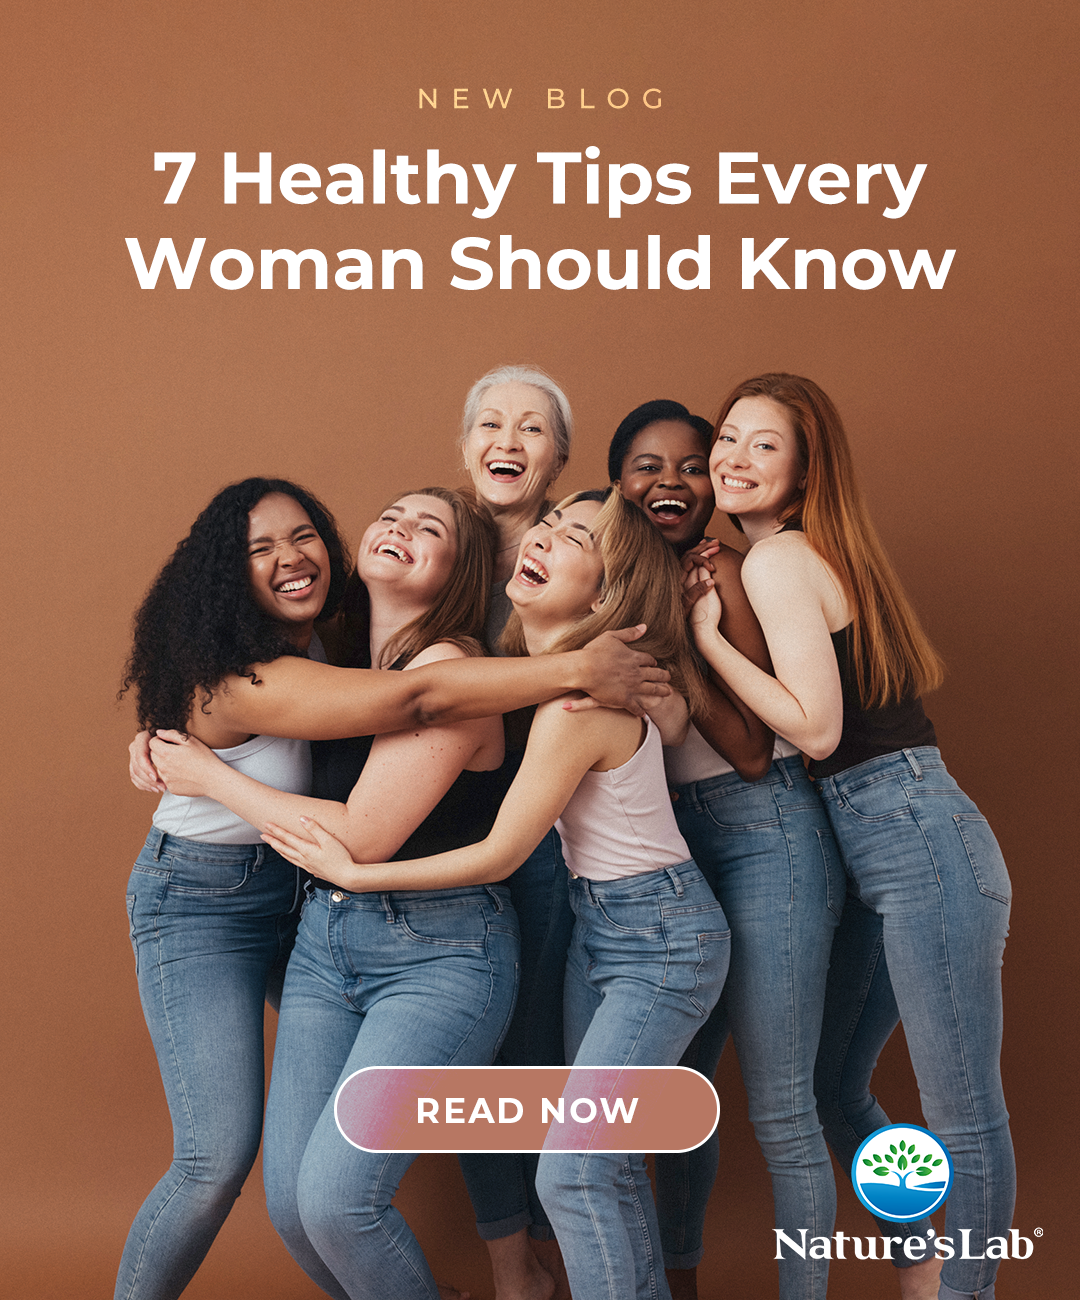 7 Healthy Tips Every Woman Should Know